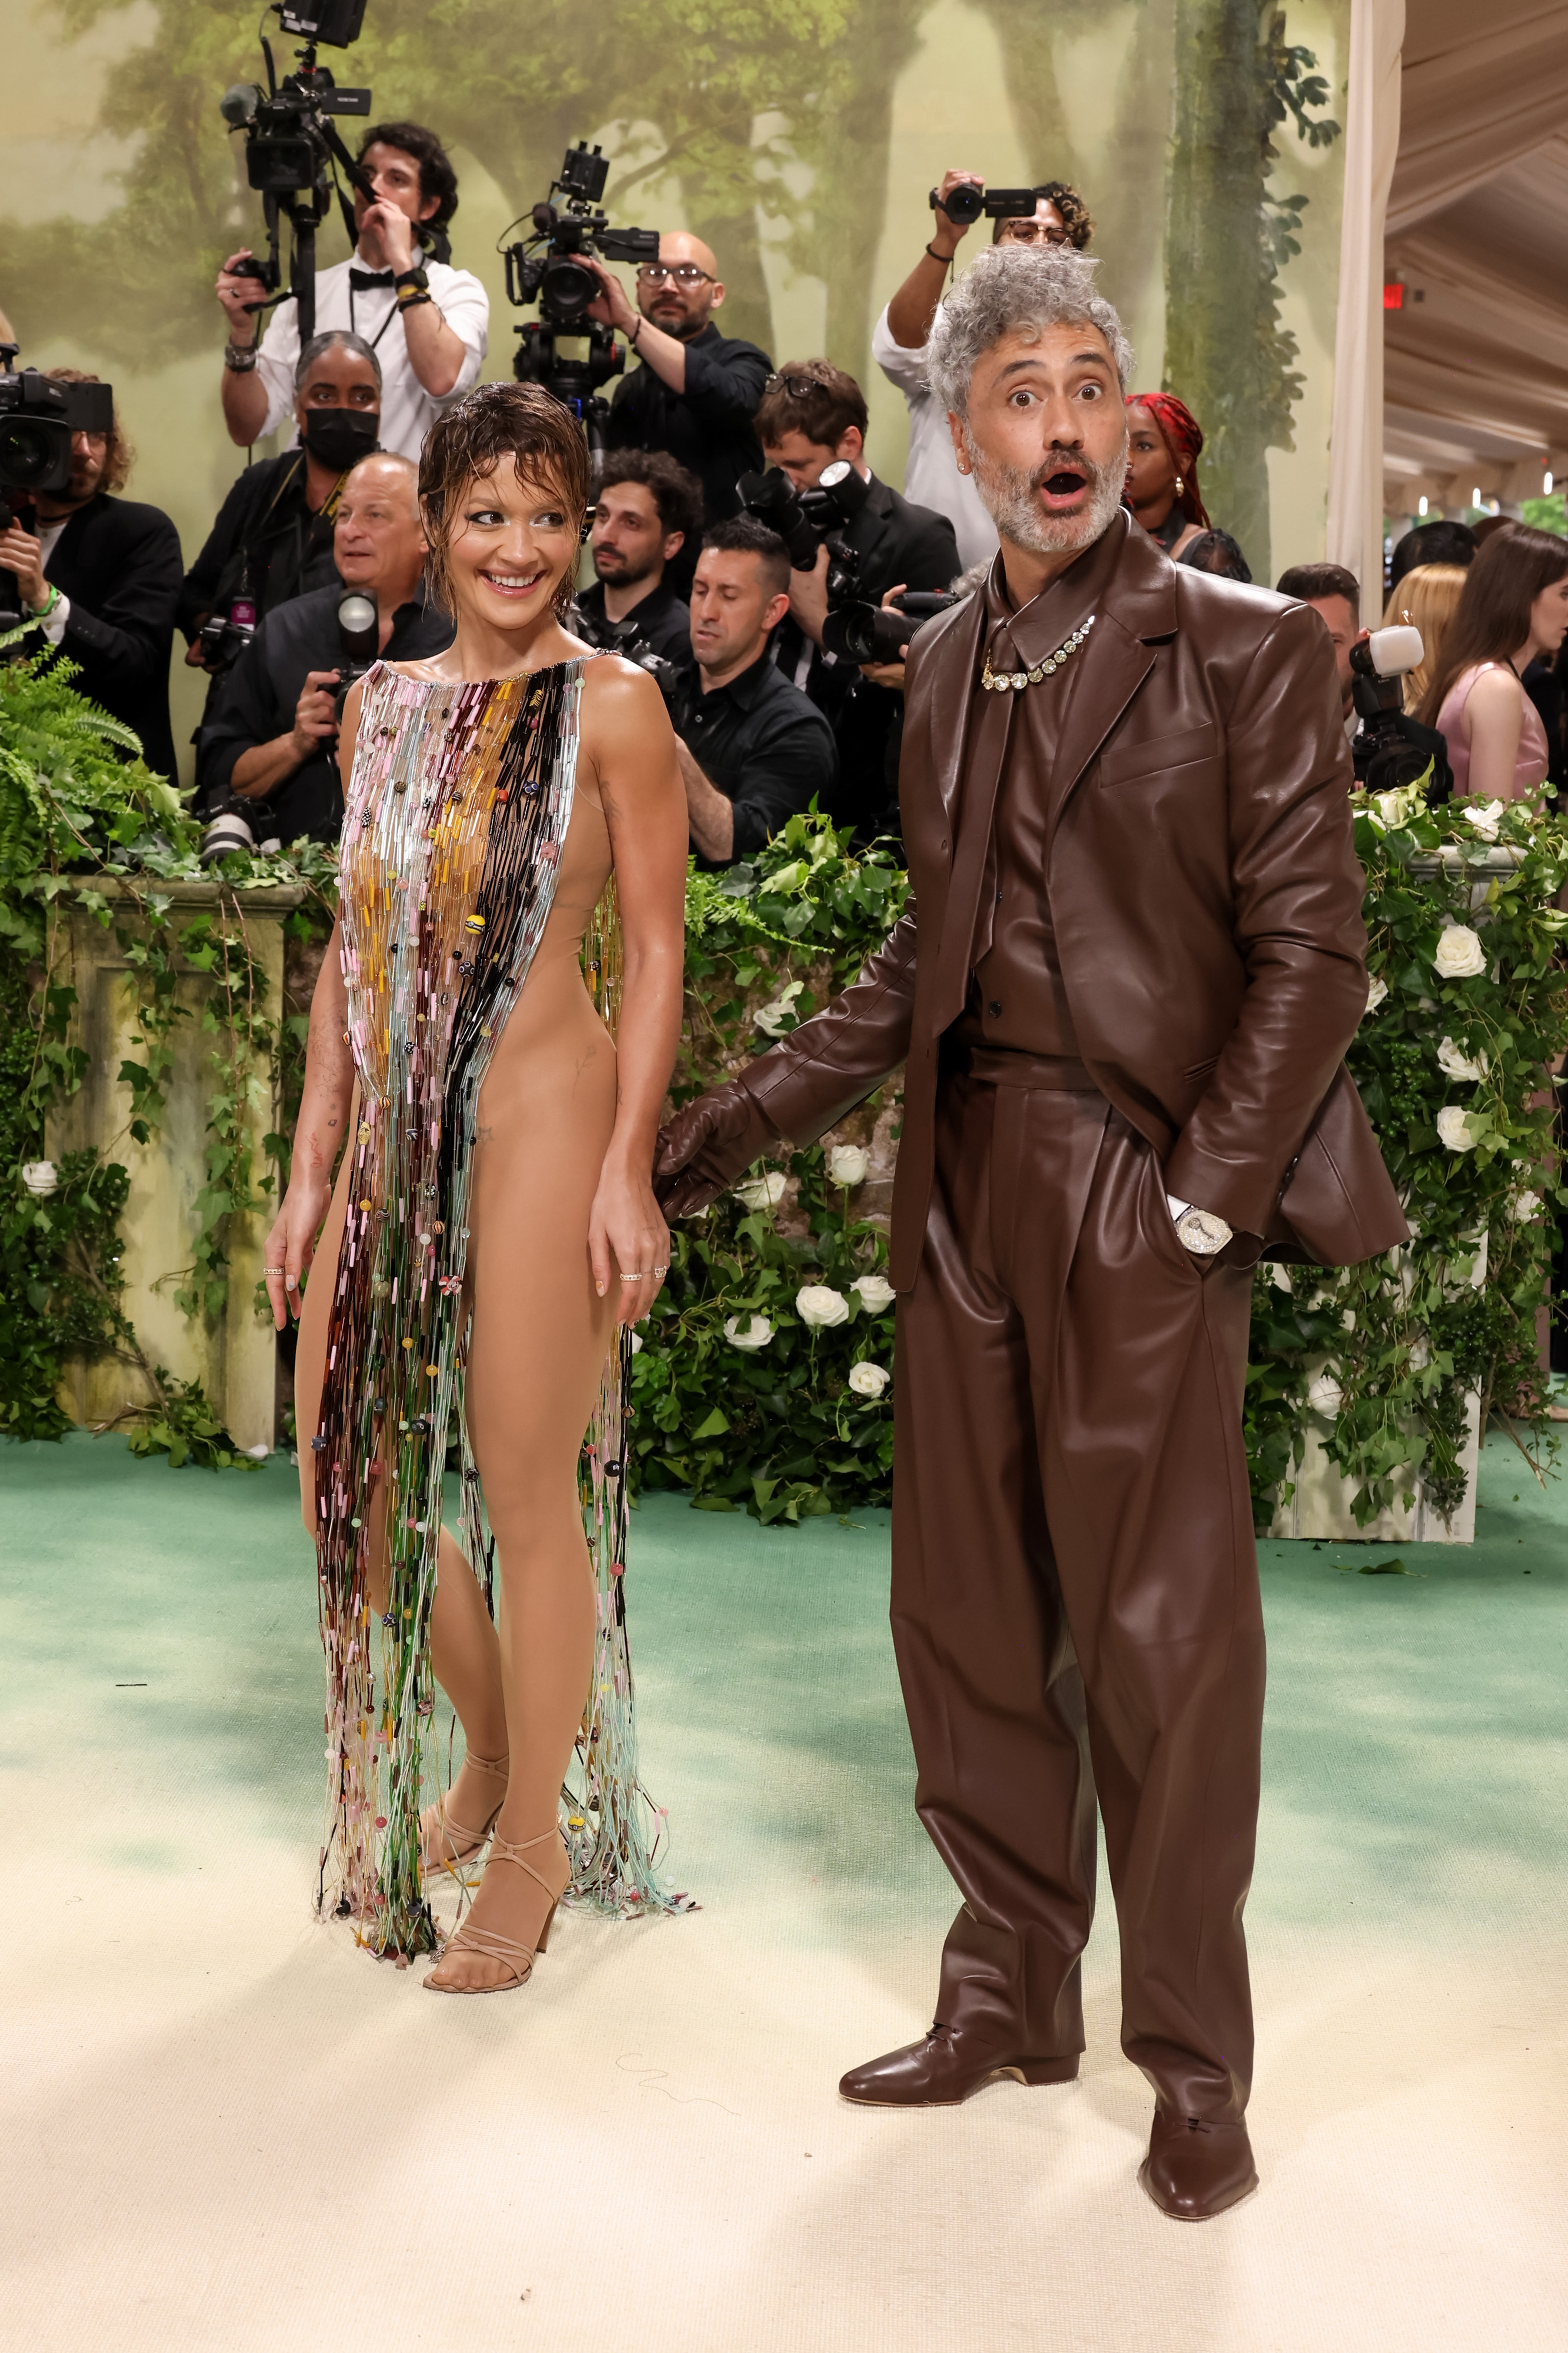 Rita donned a strappy, floor-length garment over a sheer bodysuit as she arrived at the Met Gala with her husband, Taika Waititi